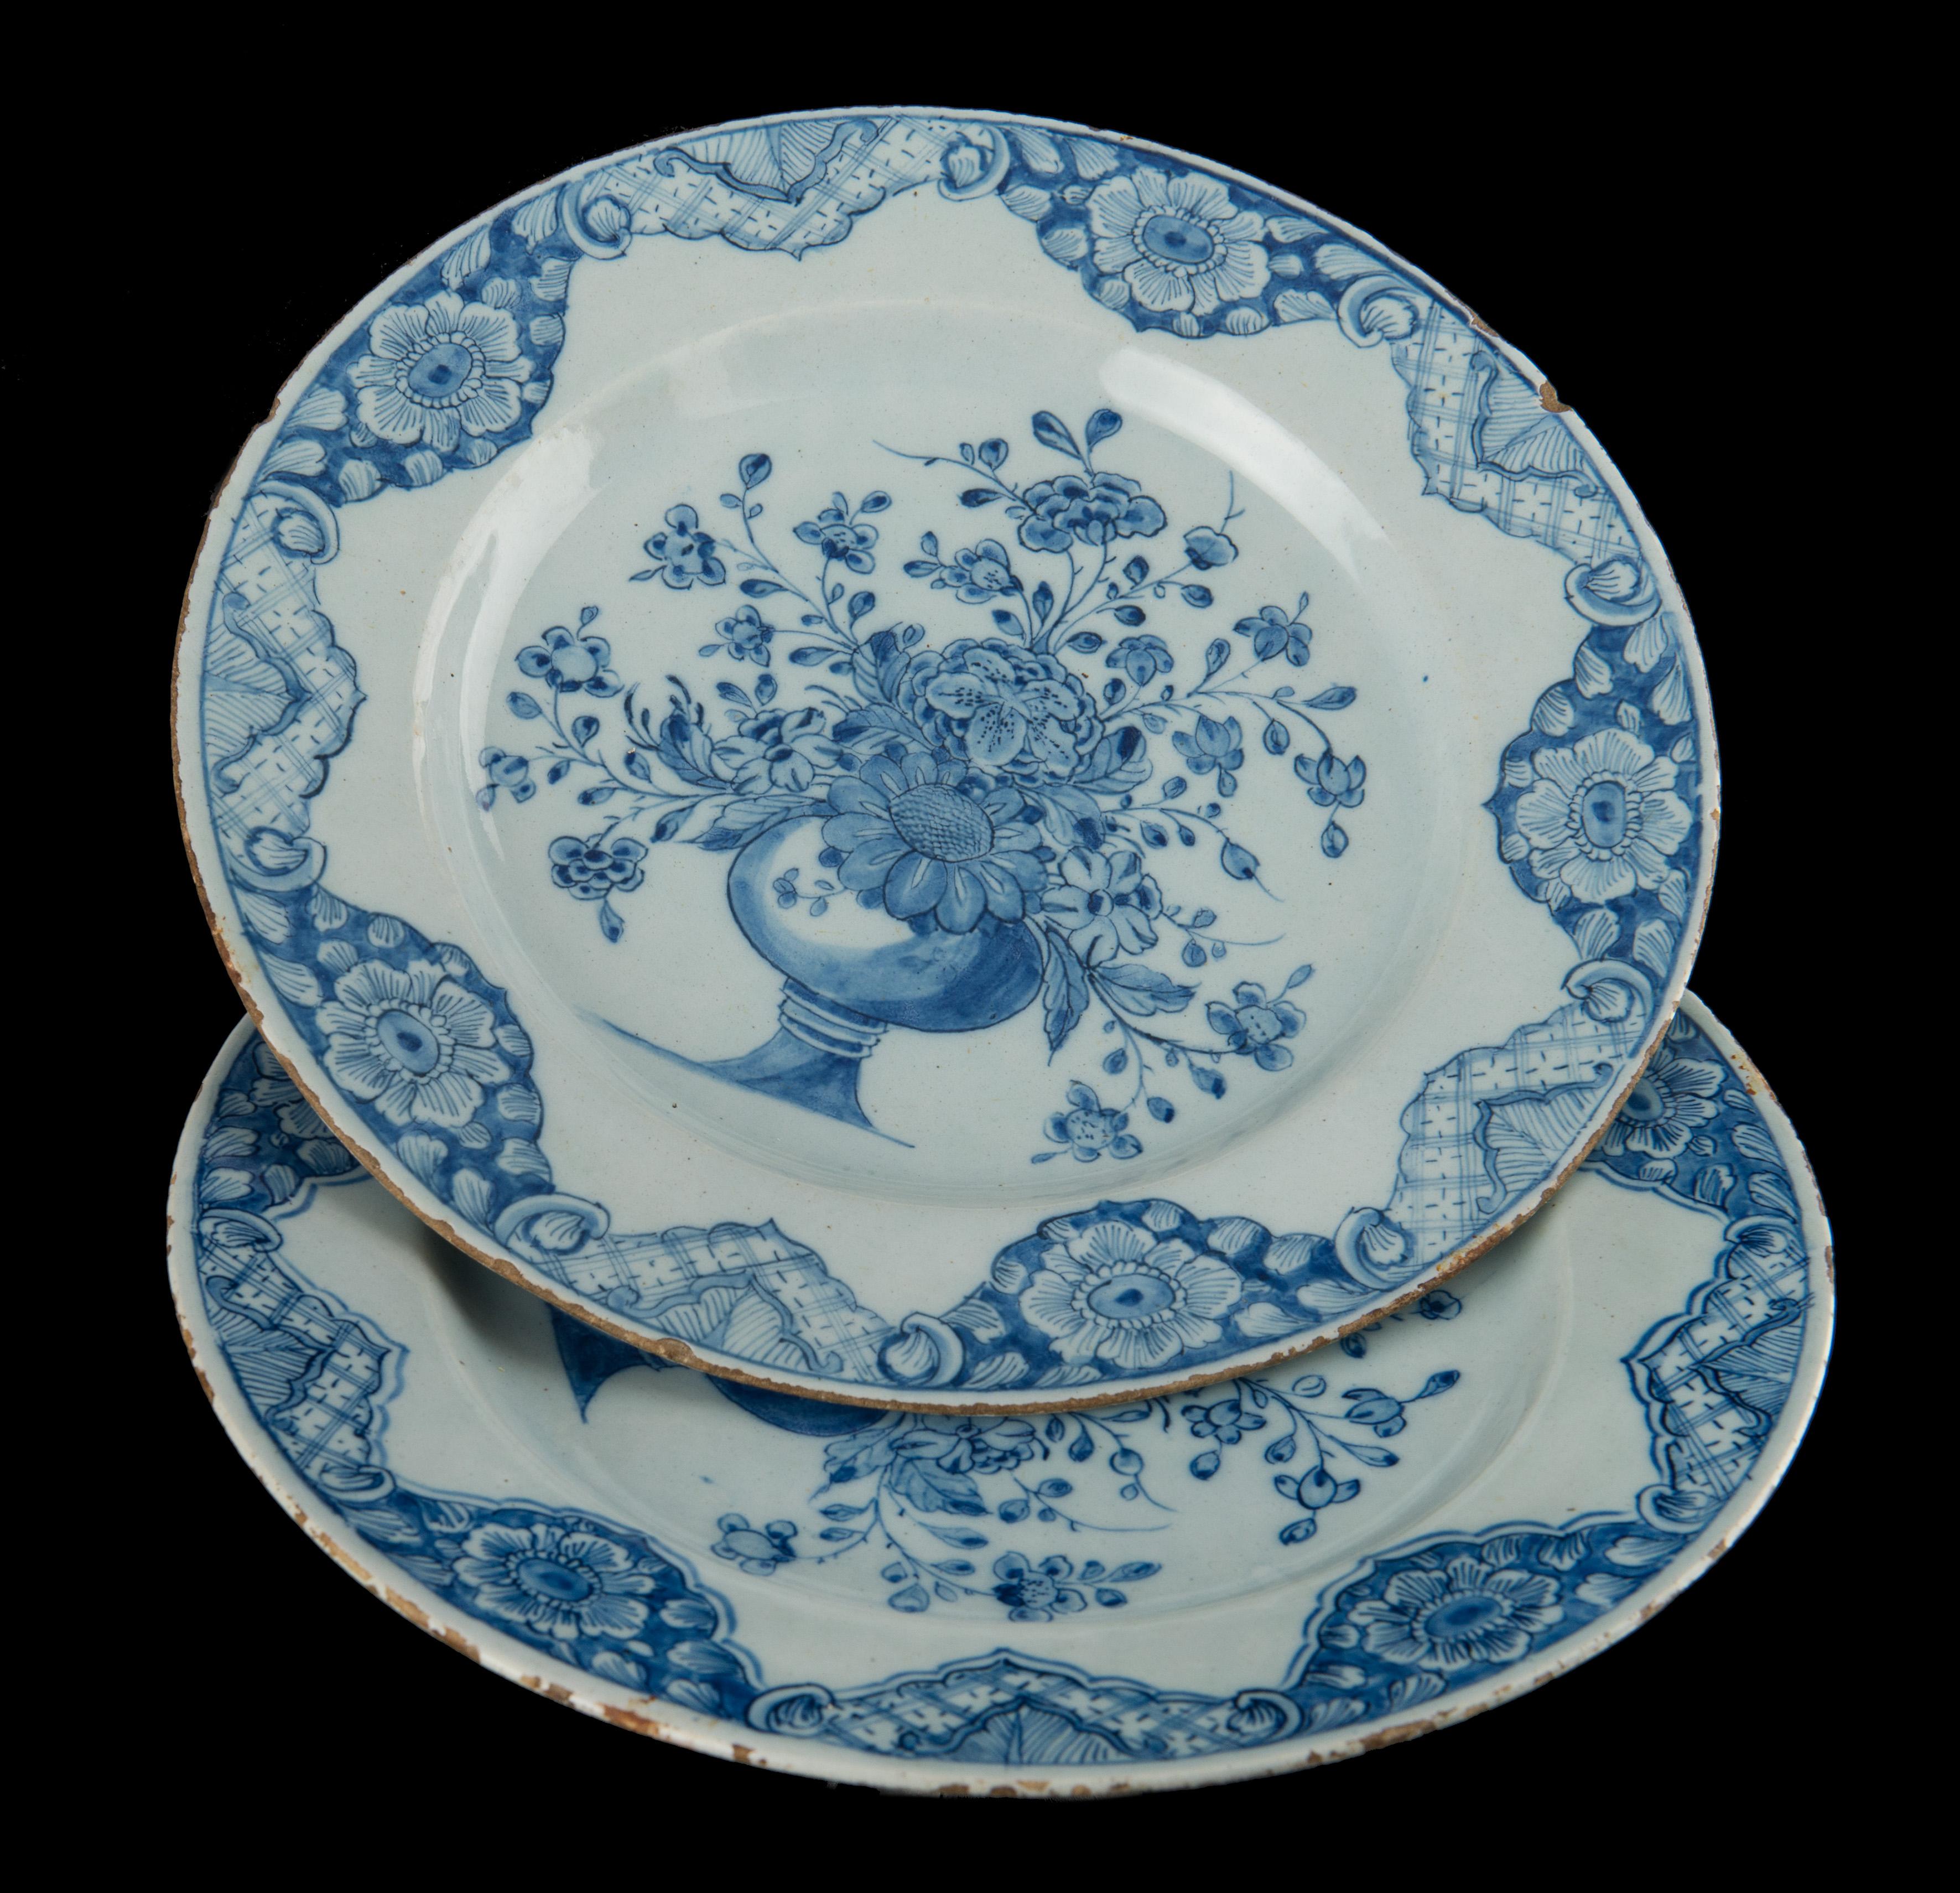 Pair of blue and white plates with flower vases. Delft, dated 1760. Mark: LV .

A pair of blue and white plates with a wide flange, painted in the center with an opulent bouquet of flowers in a vase on a high-waisted foot. The border is decorated